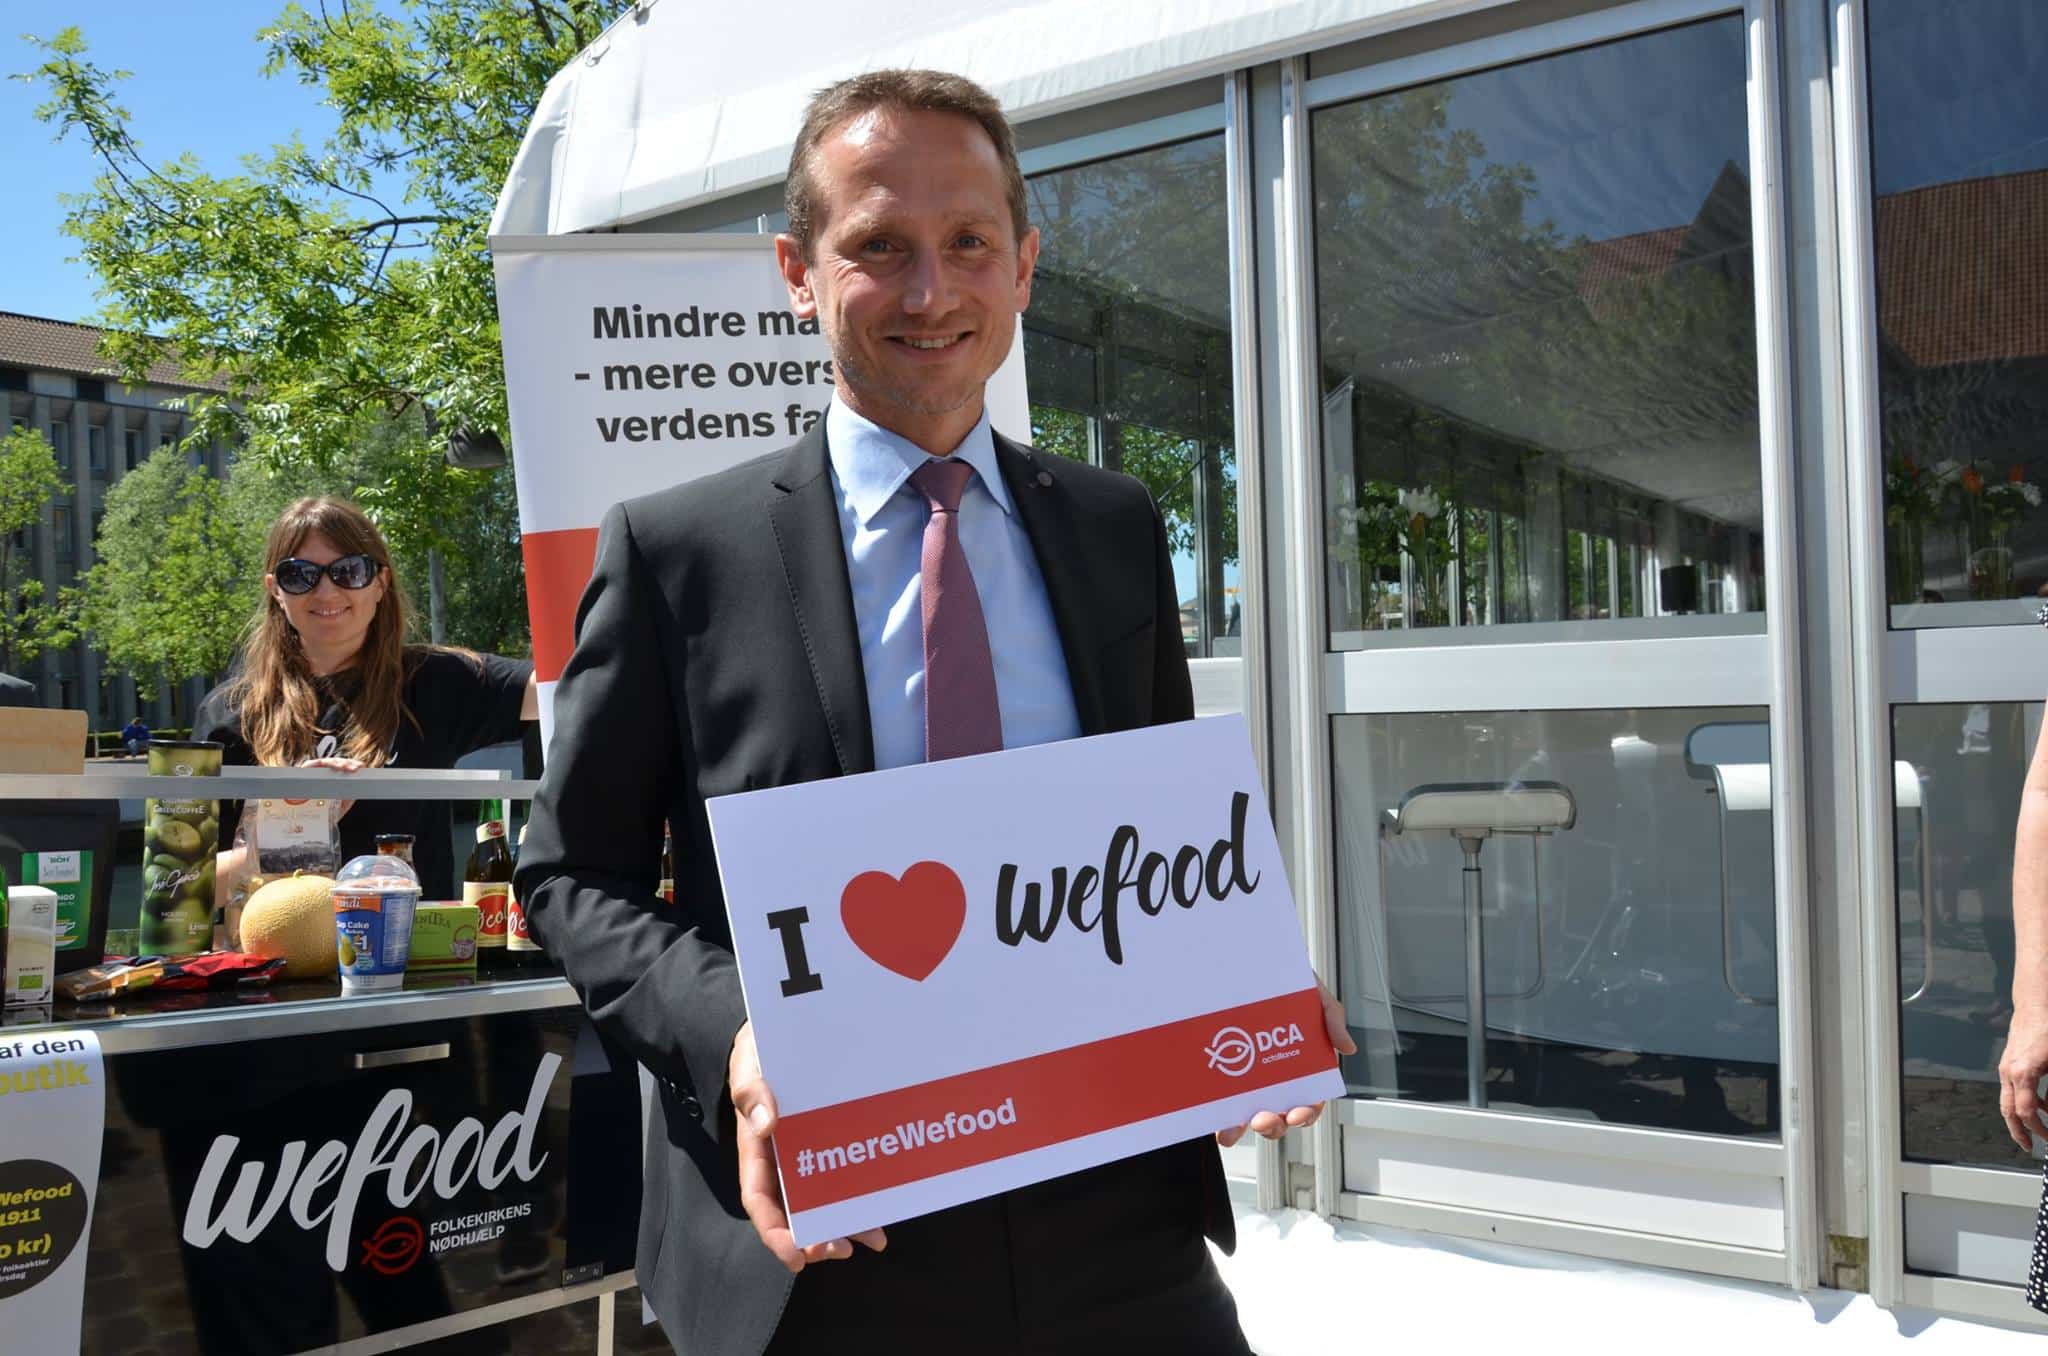 WeFood promotion campaign: famous Danes are invited for selfie, here Foreign Minister Kristian Jensen “loves” WeFood Source: https://www.facebook.com/login/?next=https%3A%2F%2Fwww.facebook.com%2FWefoodOverskudsmad